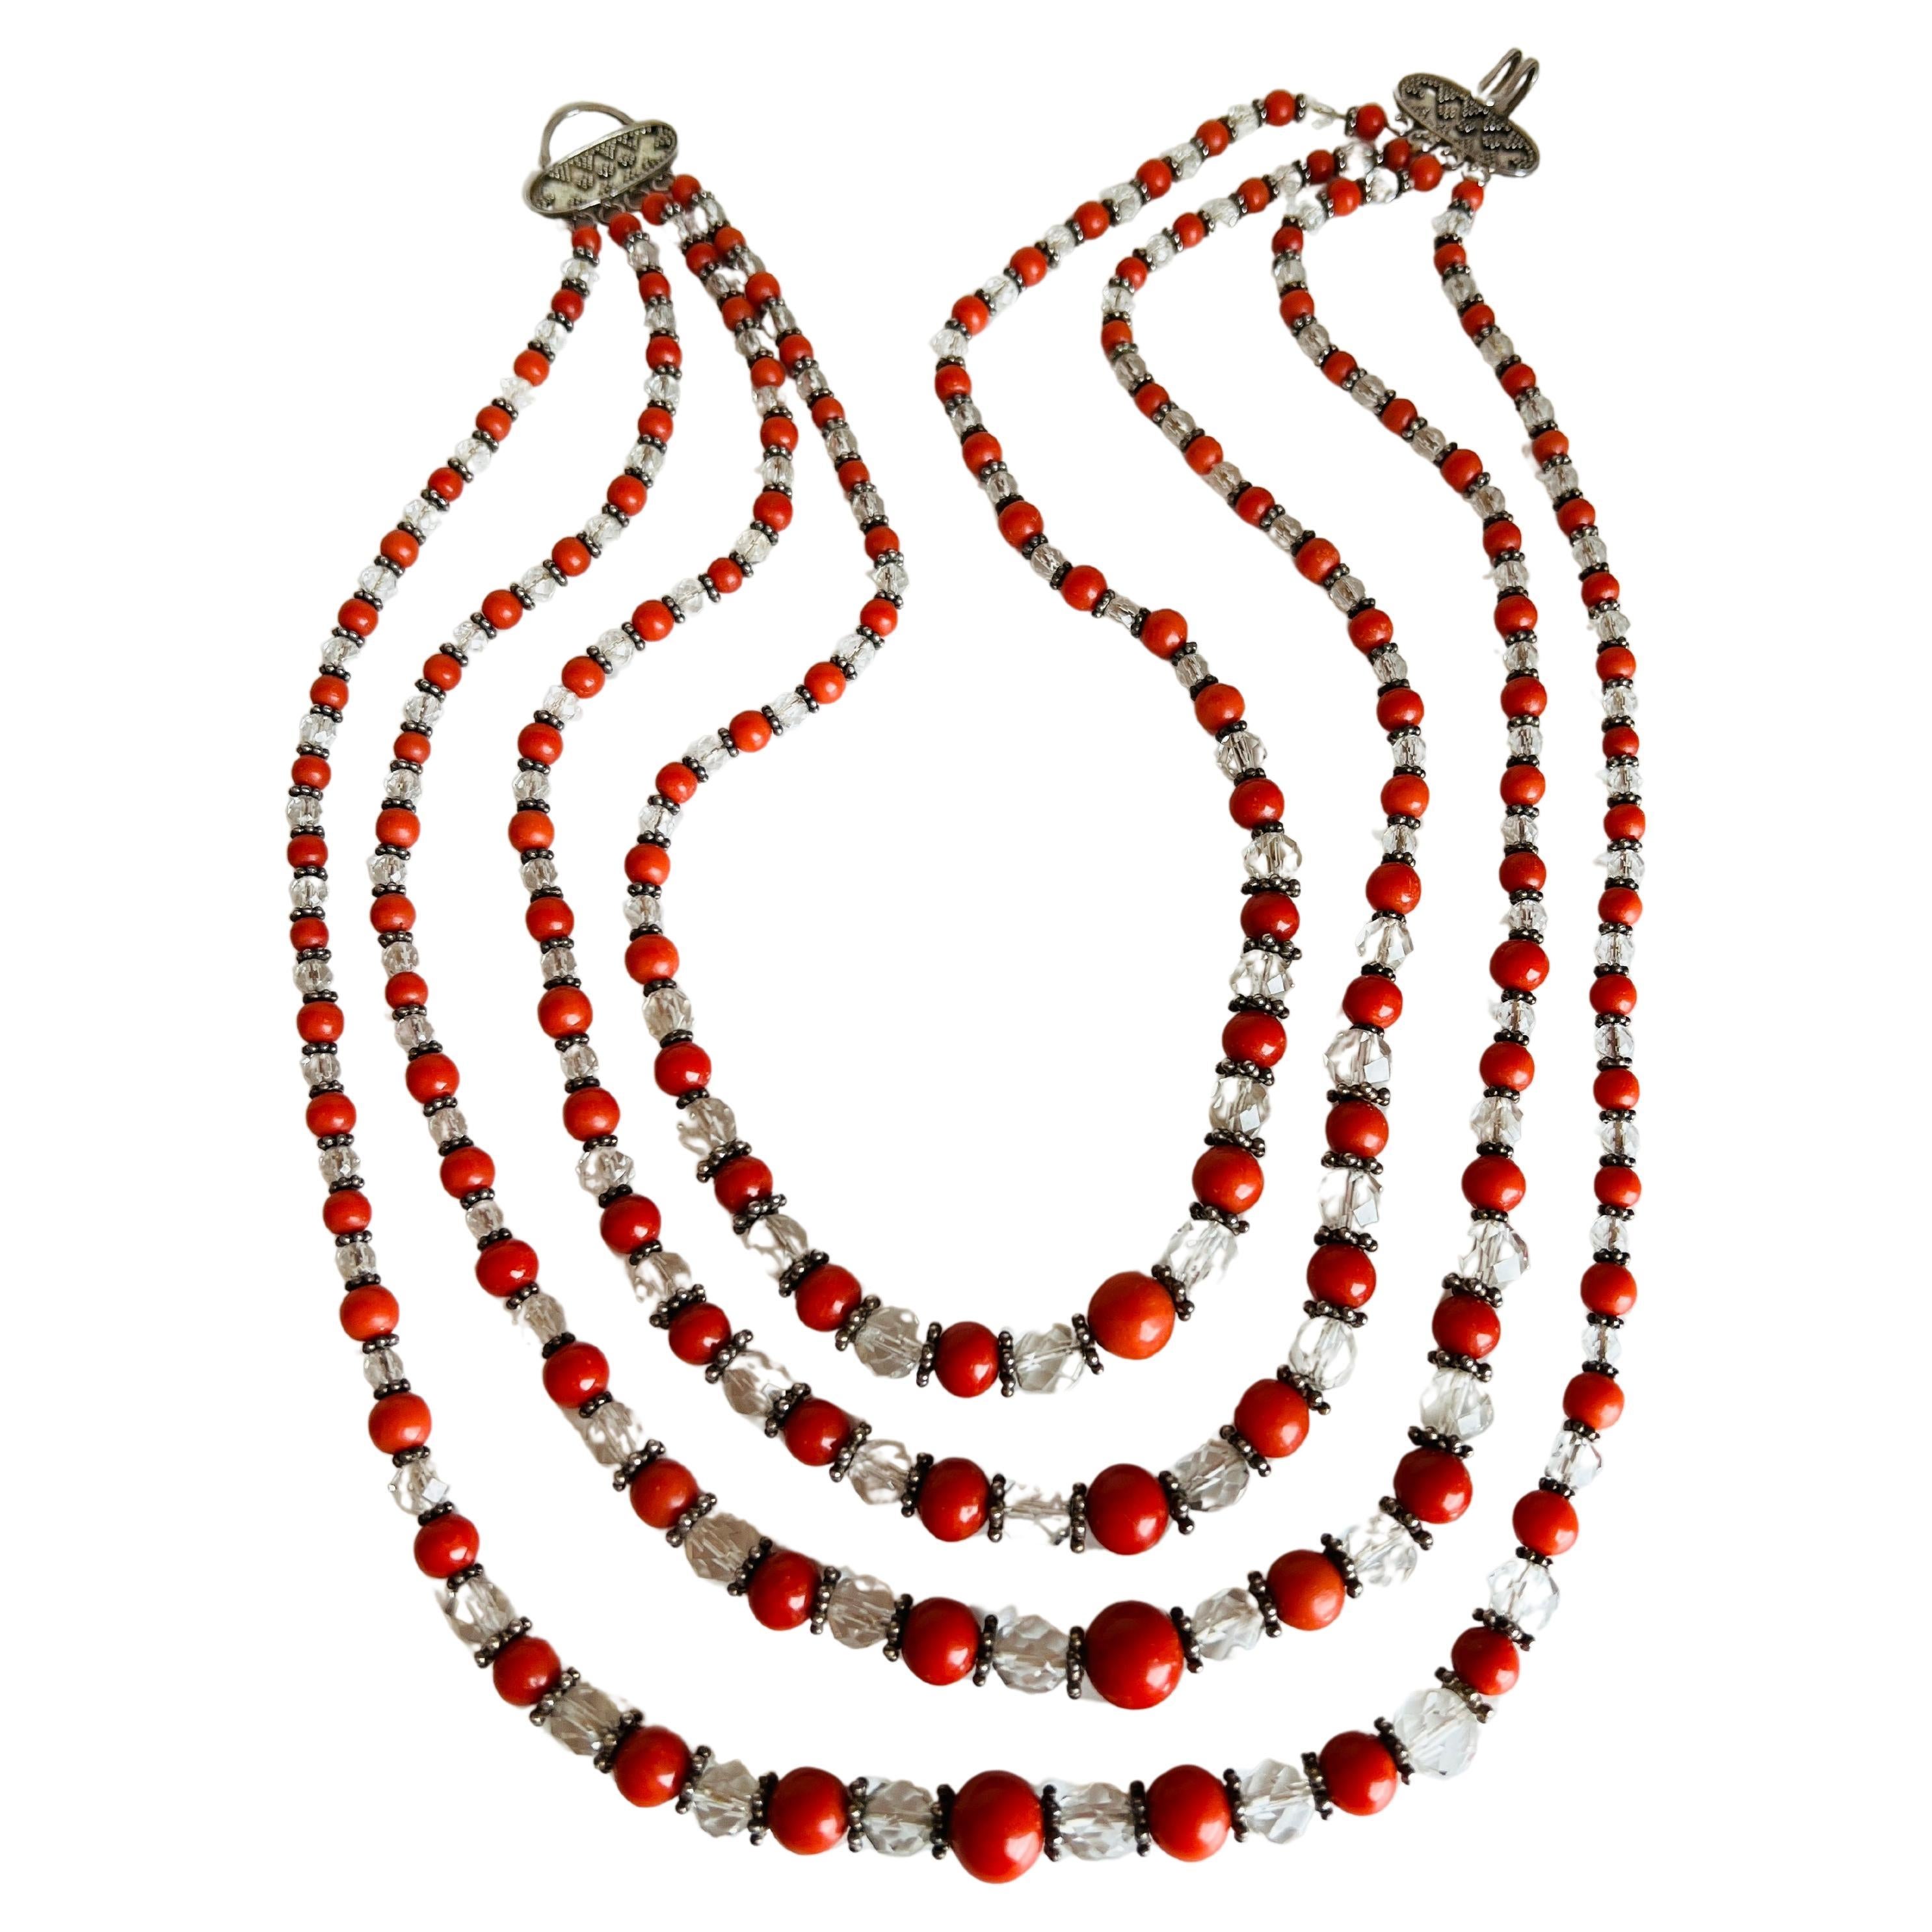 An elegant choker necklace, crafted with 4-strands of alternating vibrant orangish-red coral beads and sparkling faceted clear glass beads, each varying in size for added allure. Set in sterling silver for a sophisticated finish.

Size: The necklace